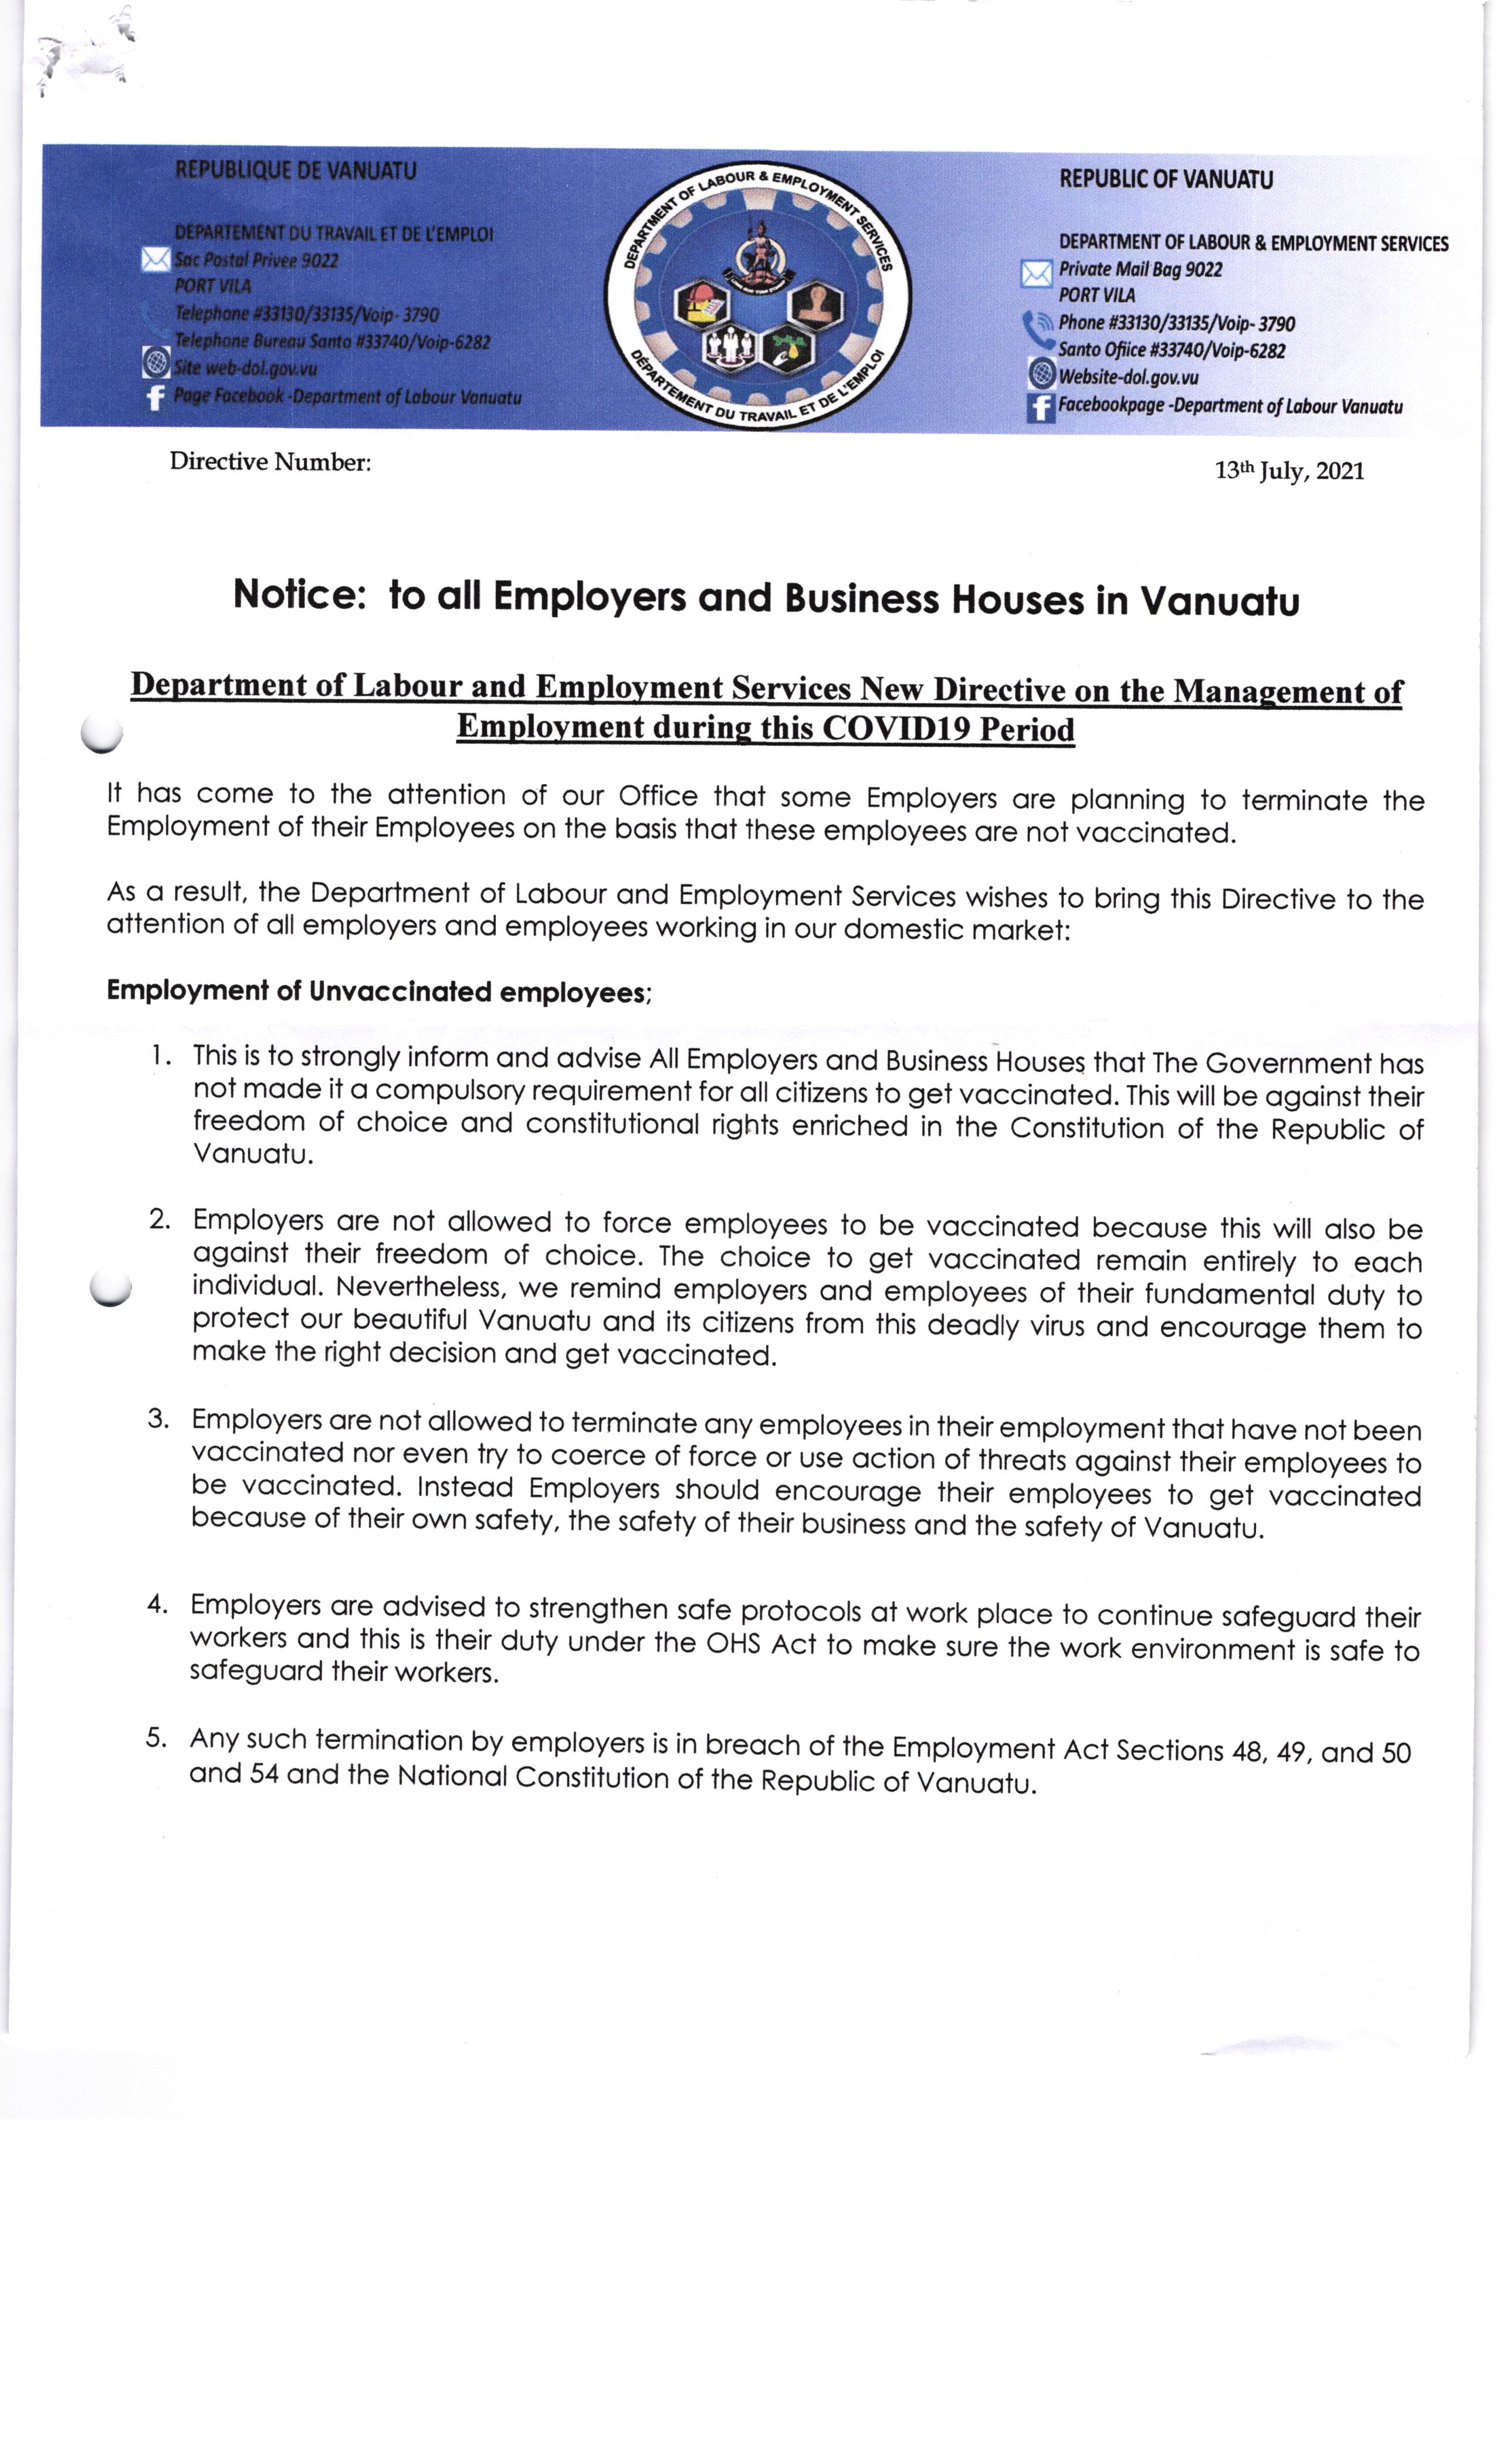 Notice: To all Employers and Business Houses In Vanuatu